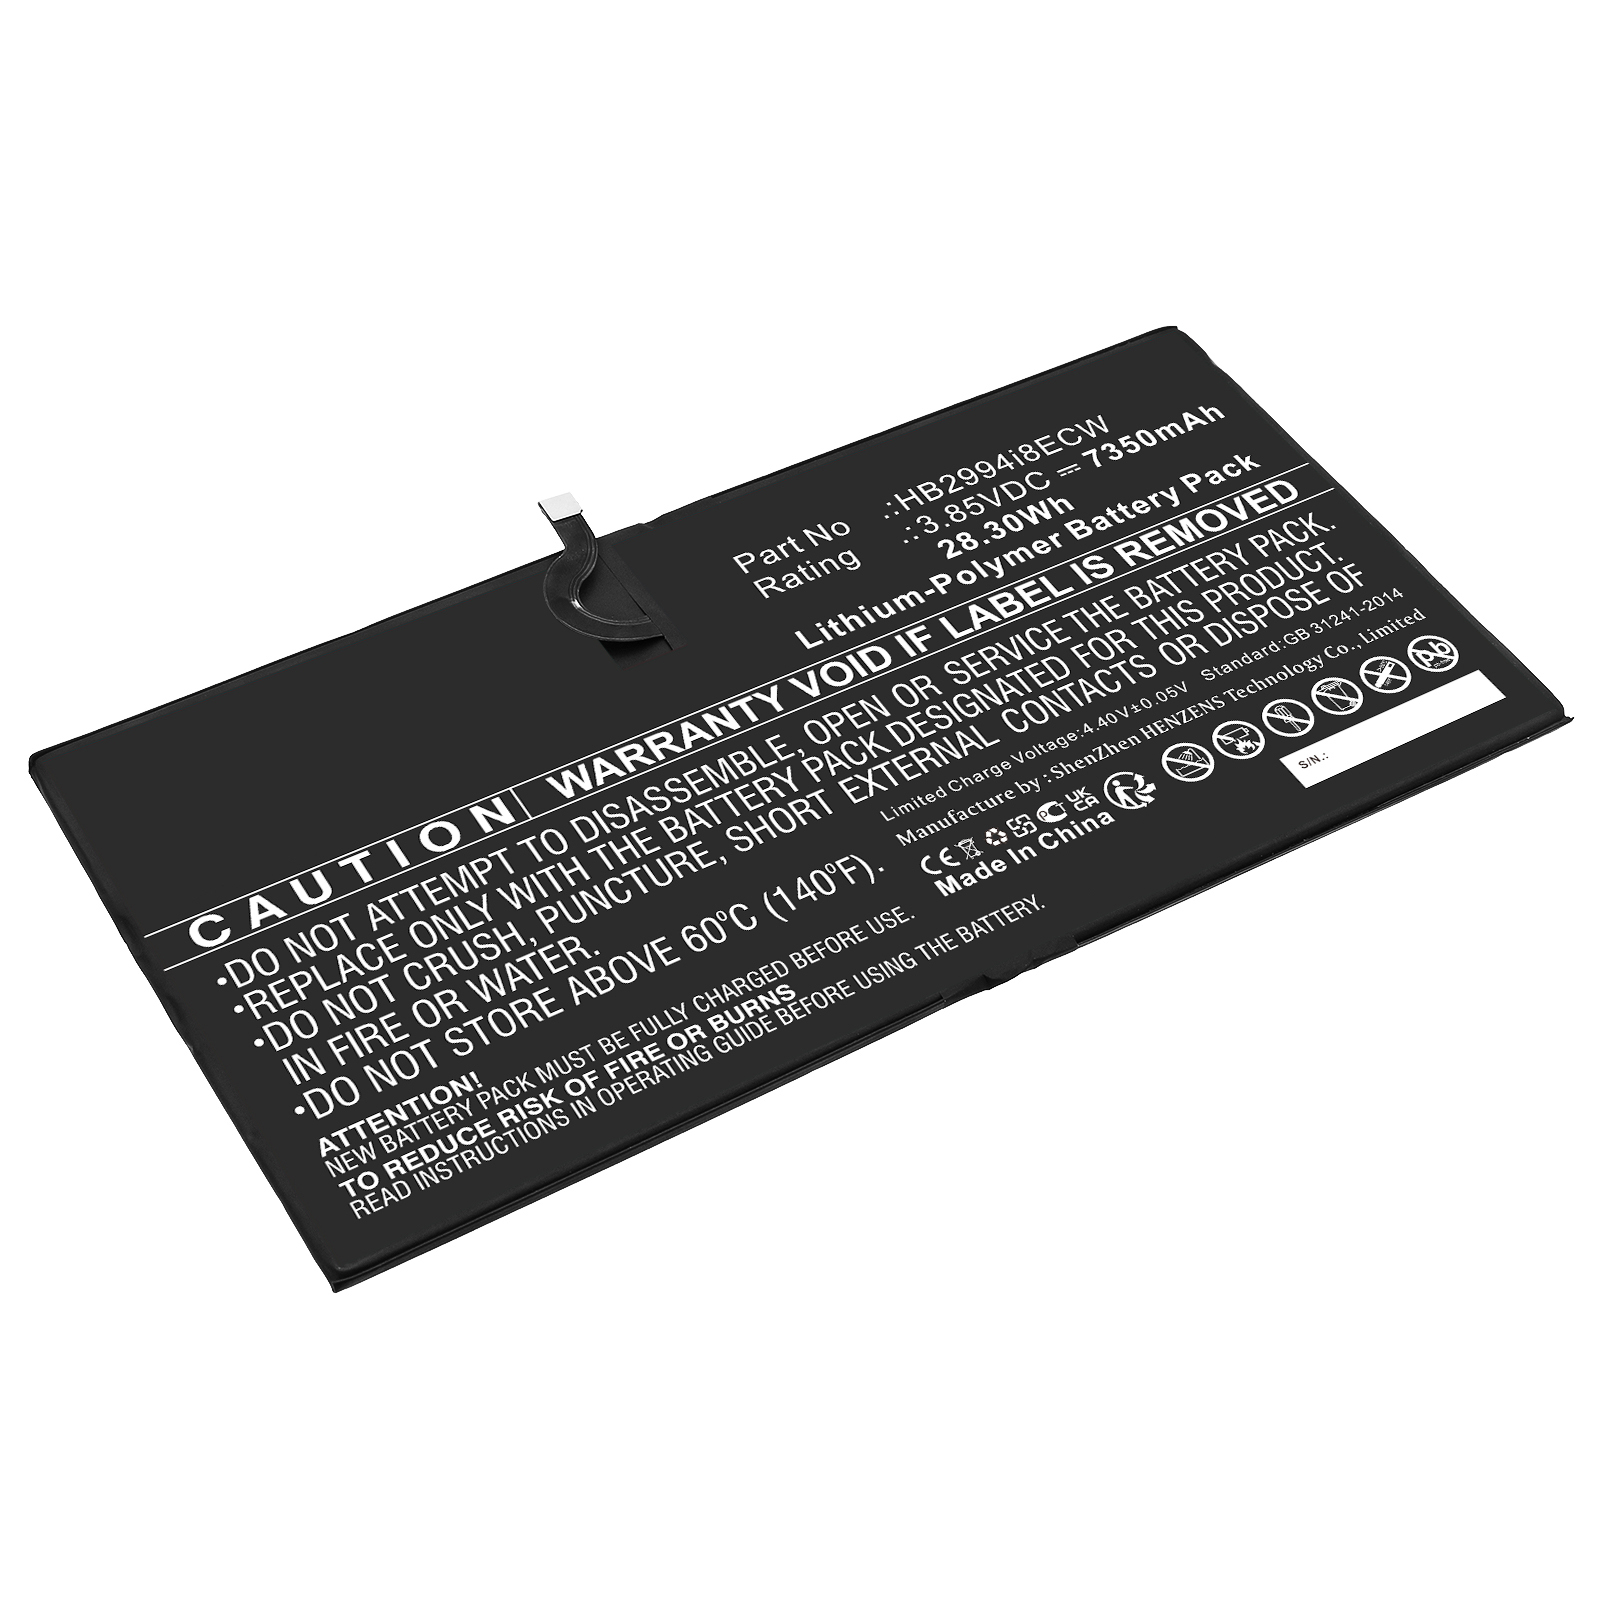 Synergy Digital Tablet Battery, Compatible with Huawei HB2994i8ECW Tablet Battery (Li-Pol, 3.85V, 7350mAh)